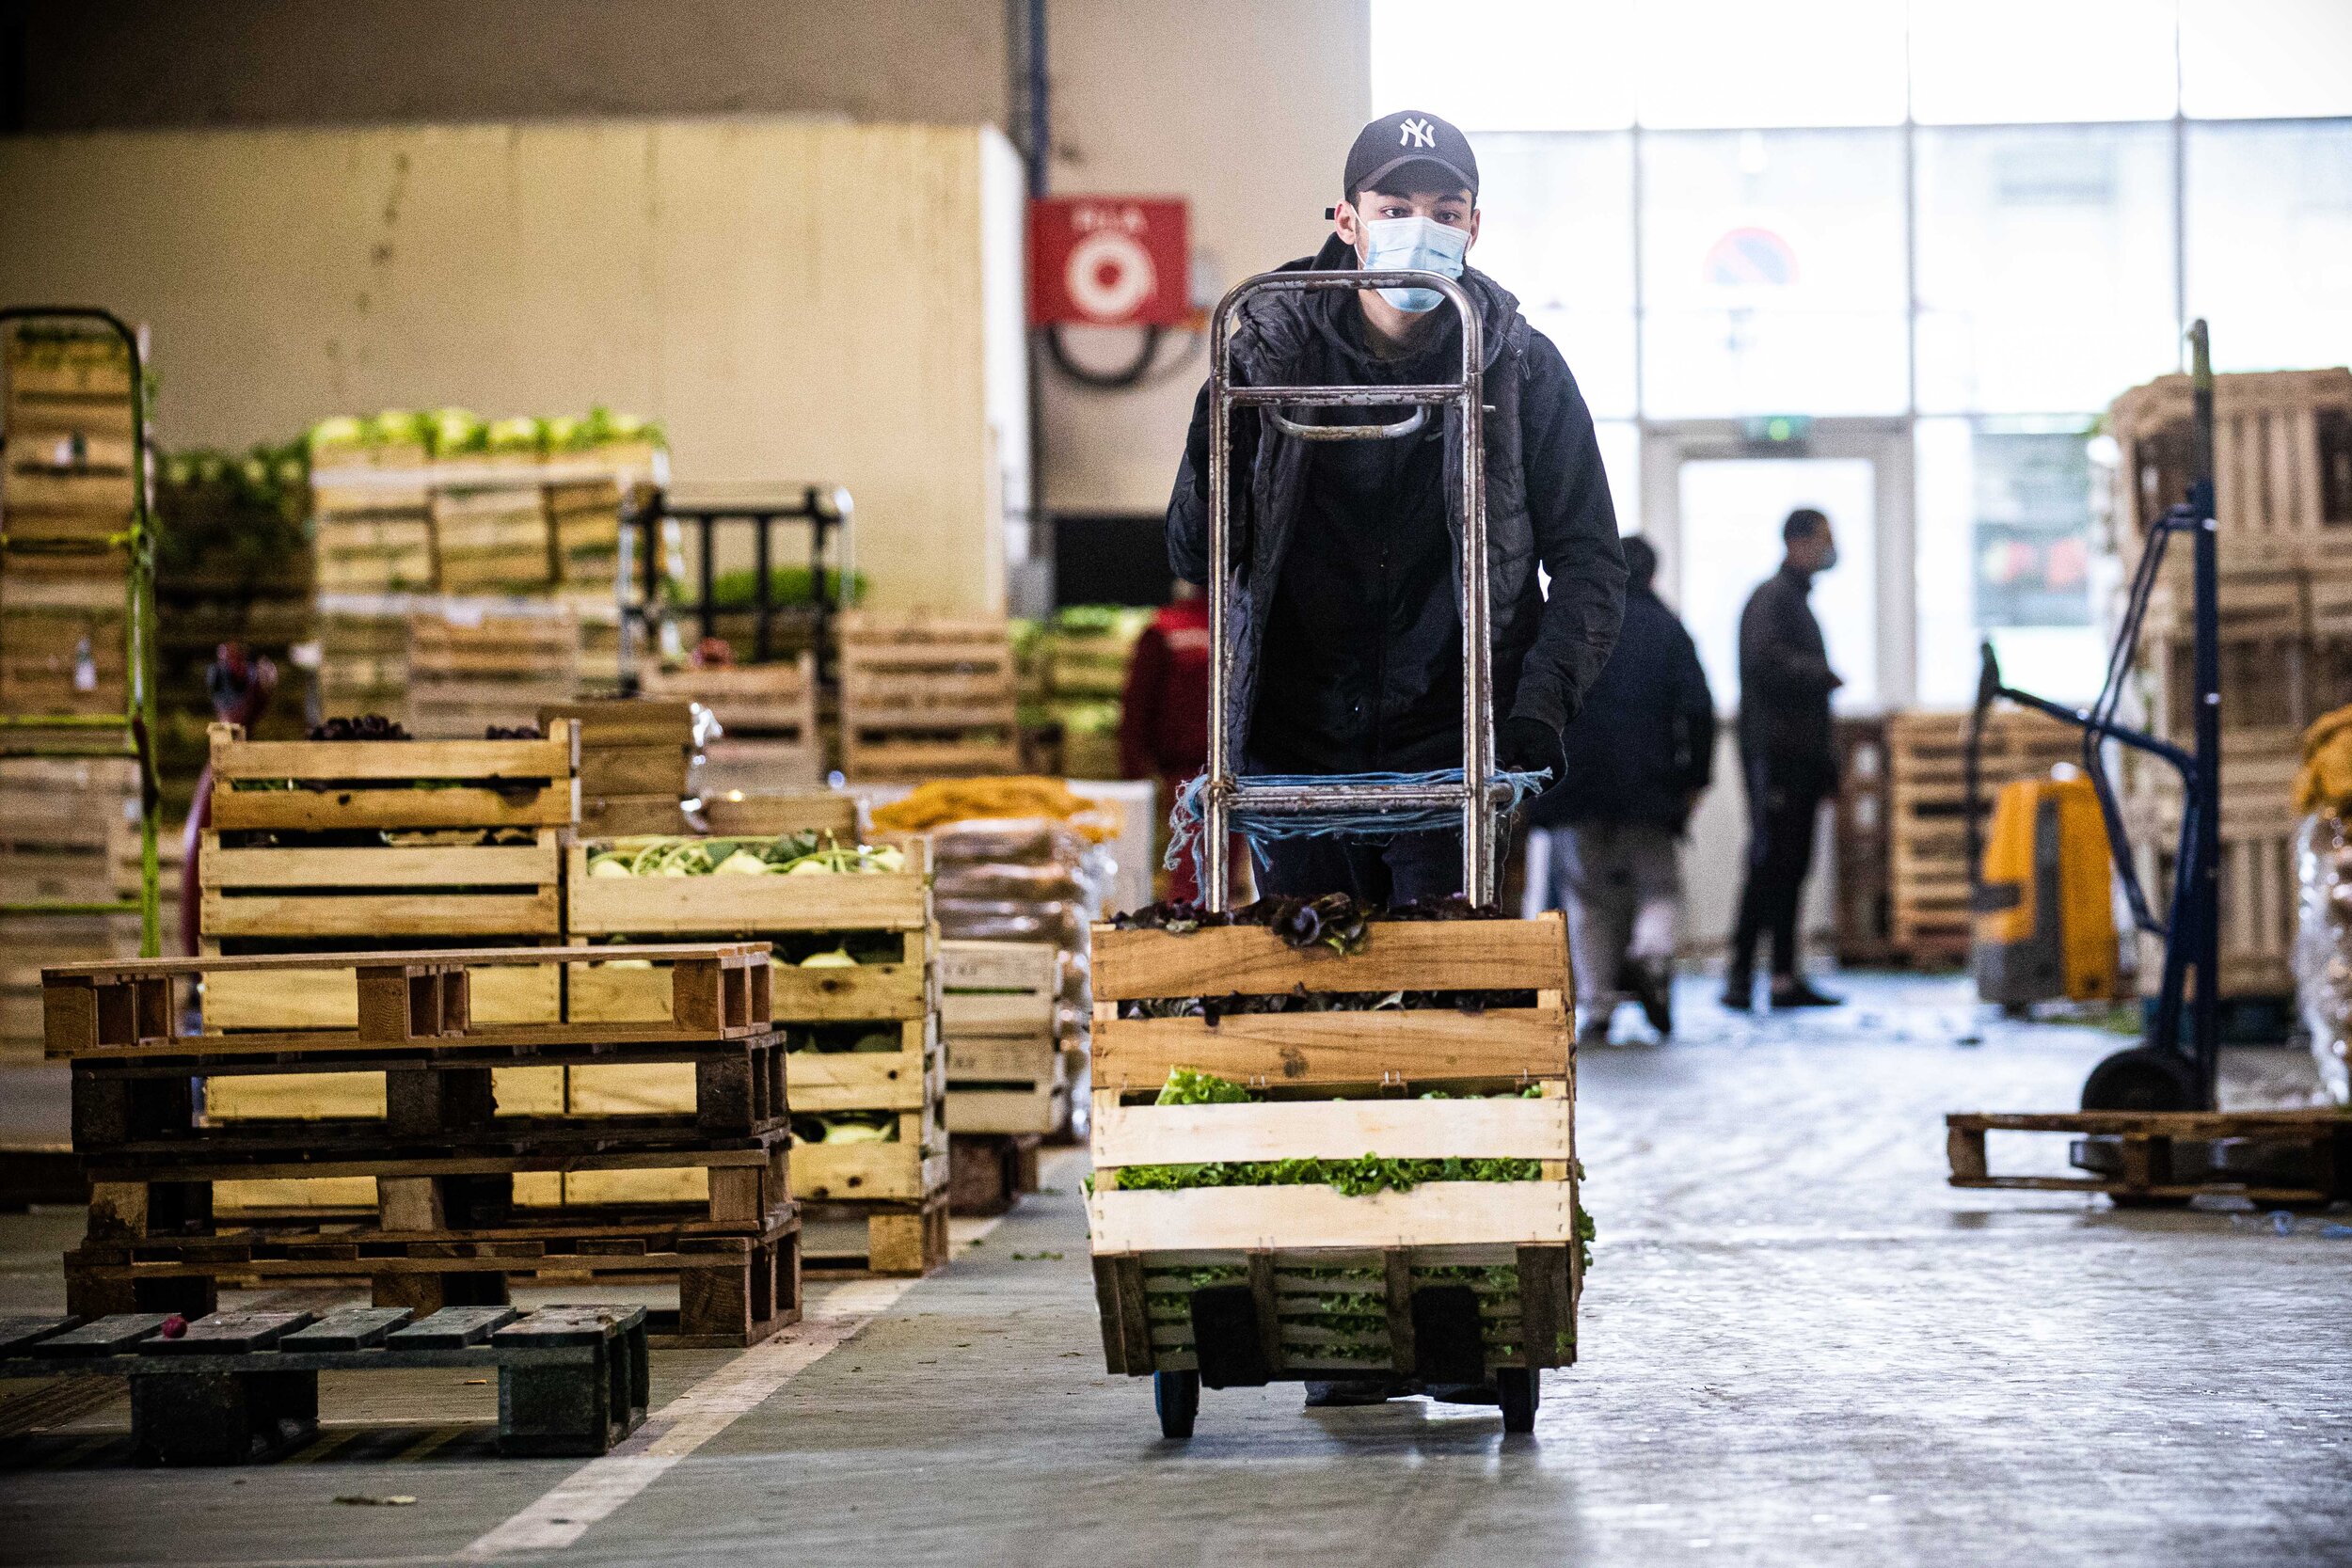   © Christophe Morin / IP3 - Employees wearing protective face masks at work at Rungis international wholesale market as France is slowly reopening after almost two months of strict lockdown throughout the country due to the epidemic of coronavirus (